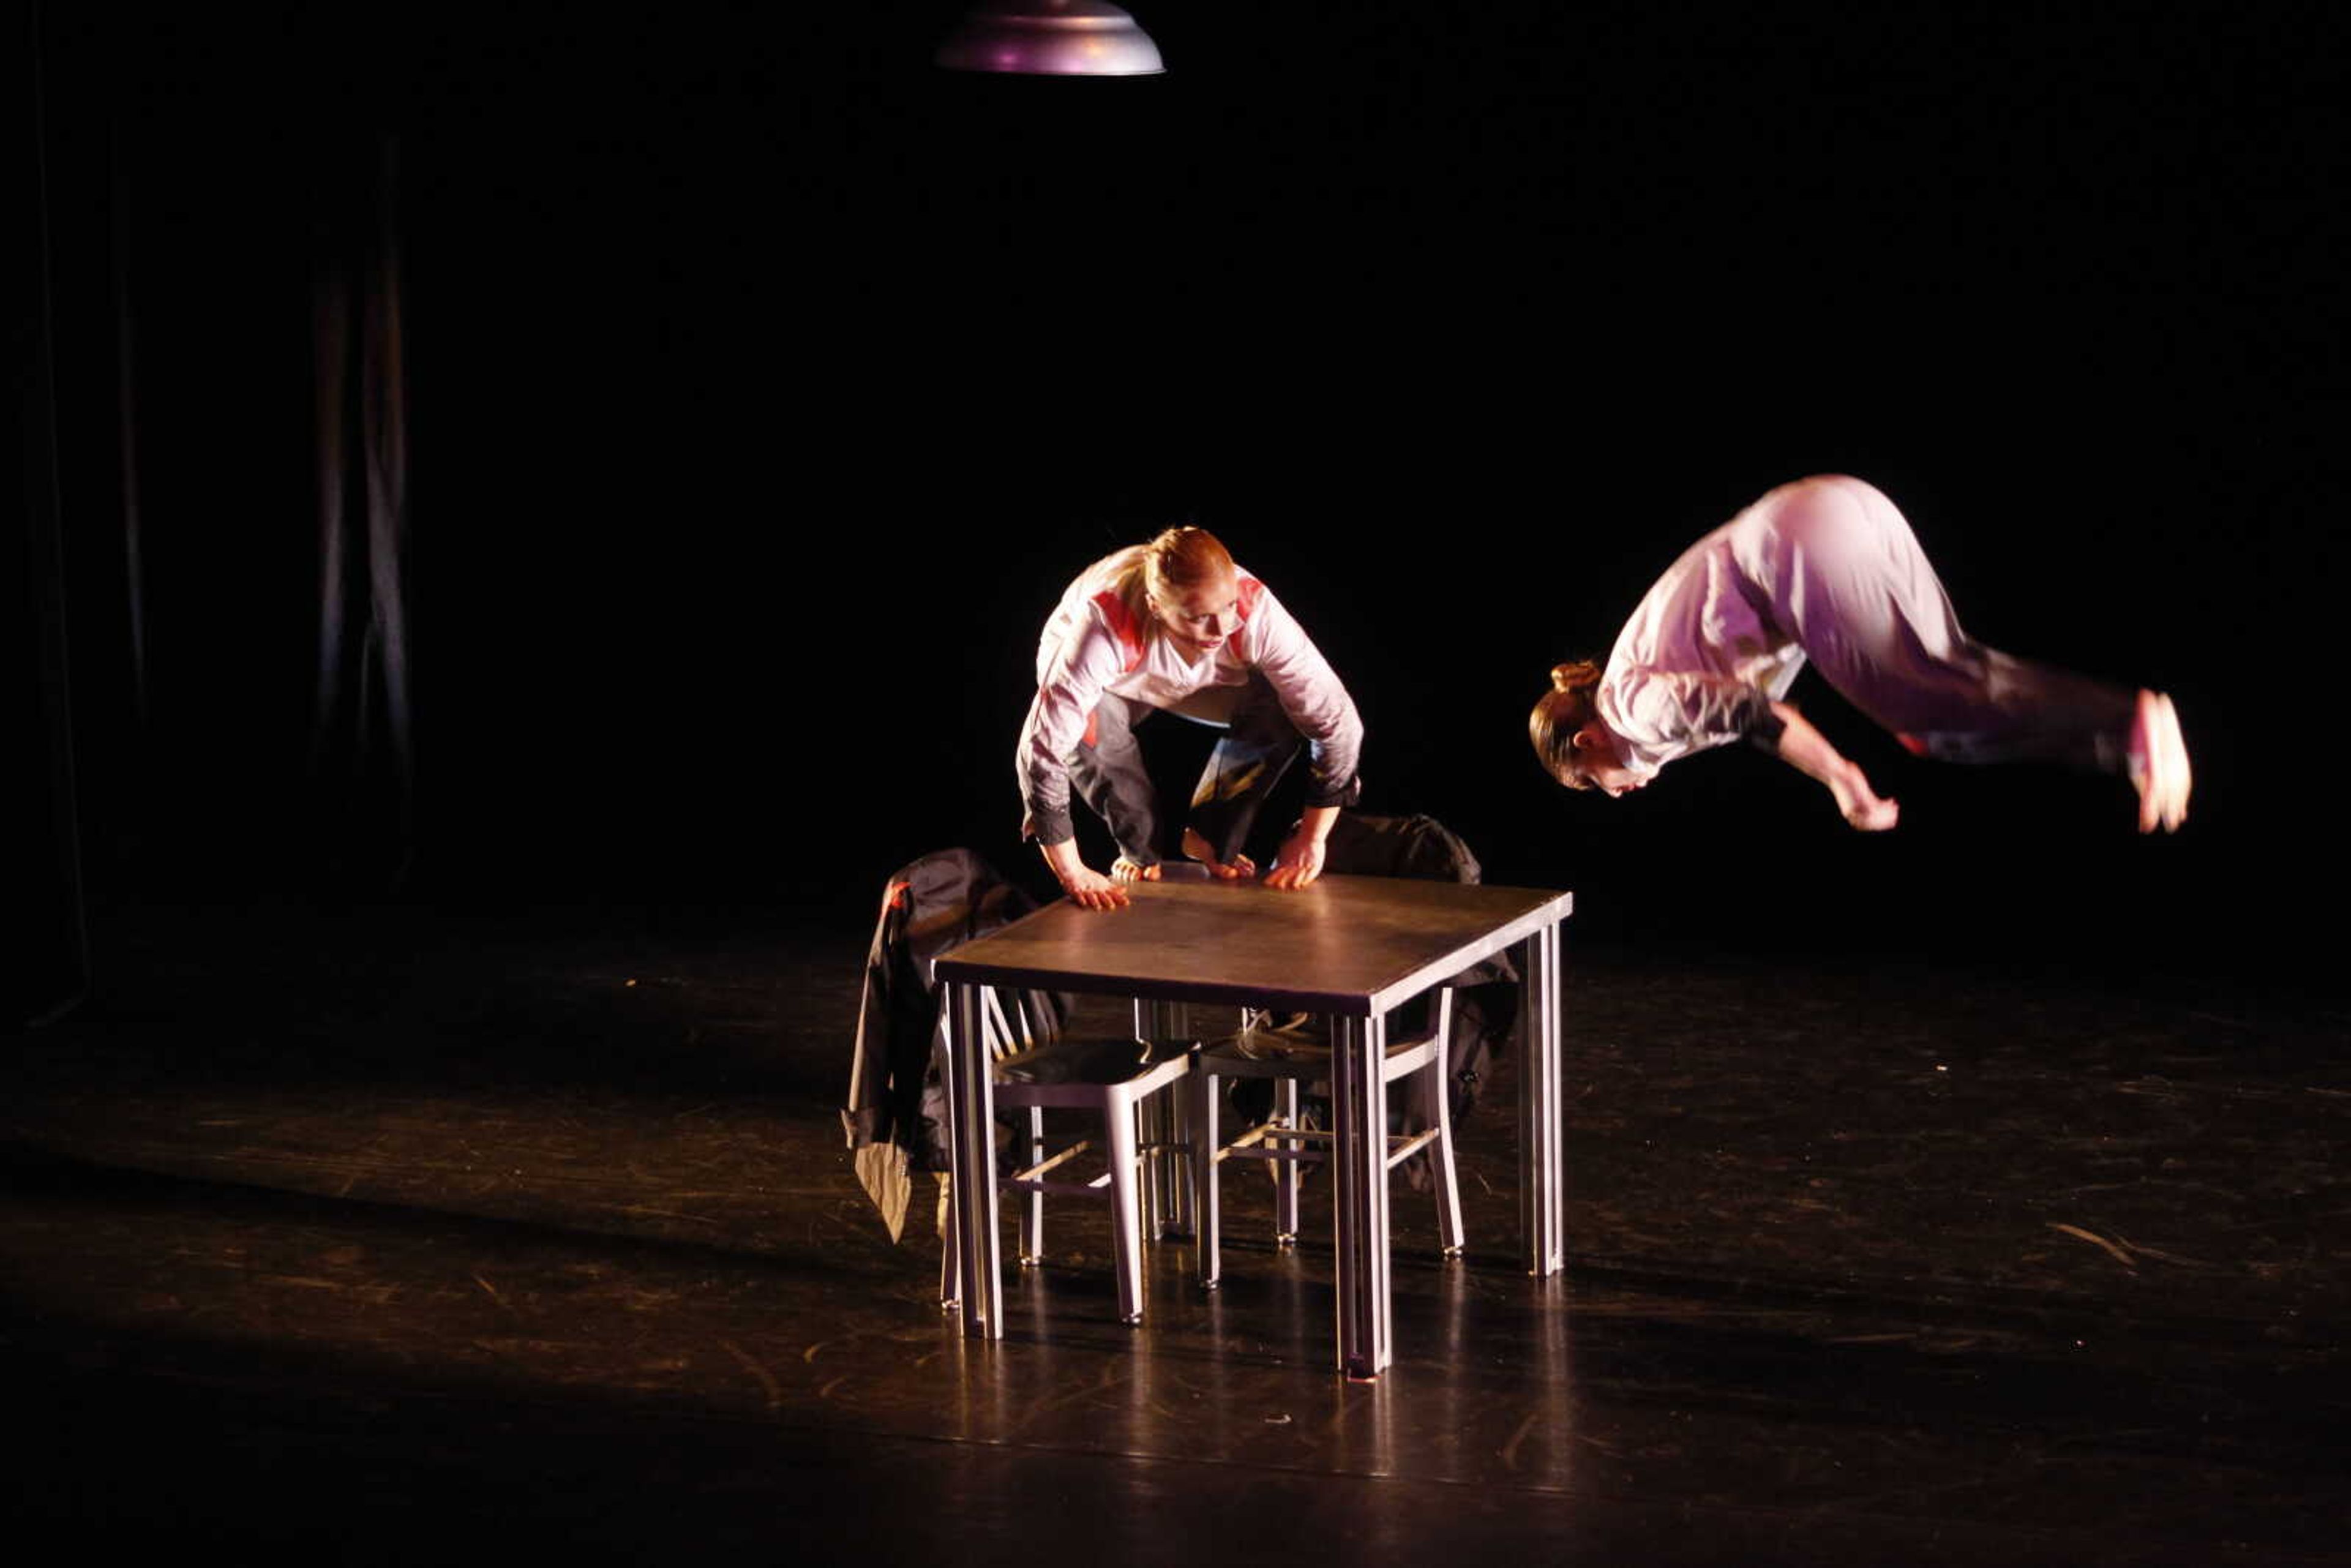 Southeast dance students Maggie Stein and Dani Tuegel performing the piece "Polite Peoplel" during 'Spring into Dance' April 4 at Bedell Performance Hall.